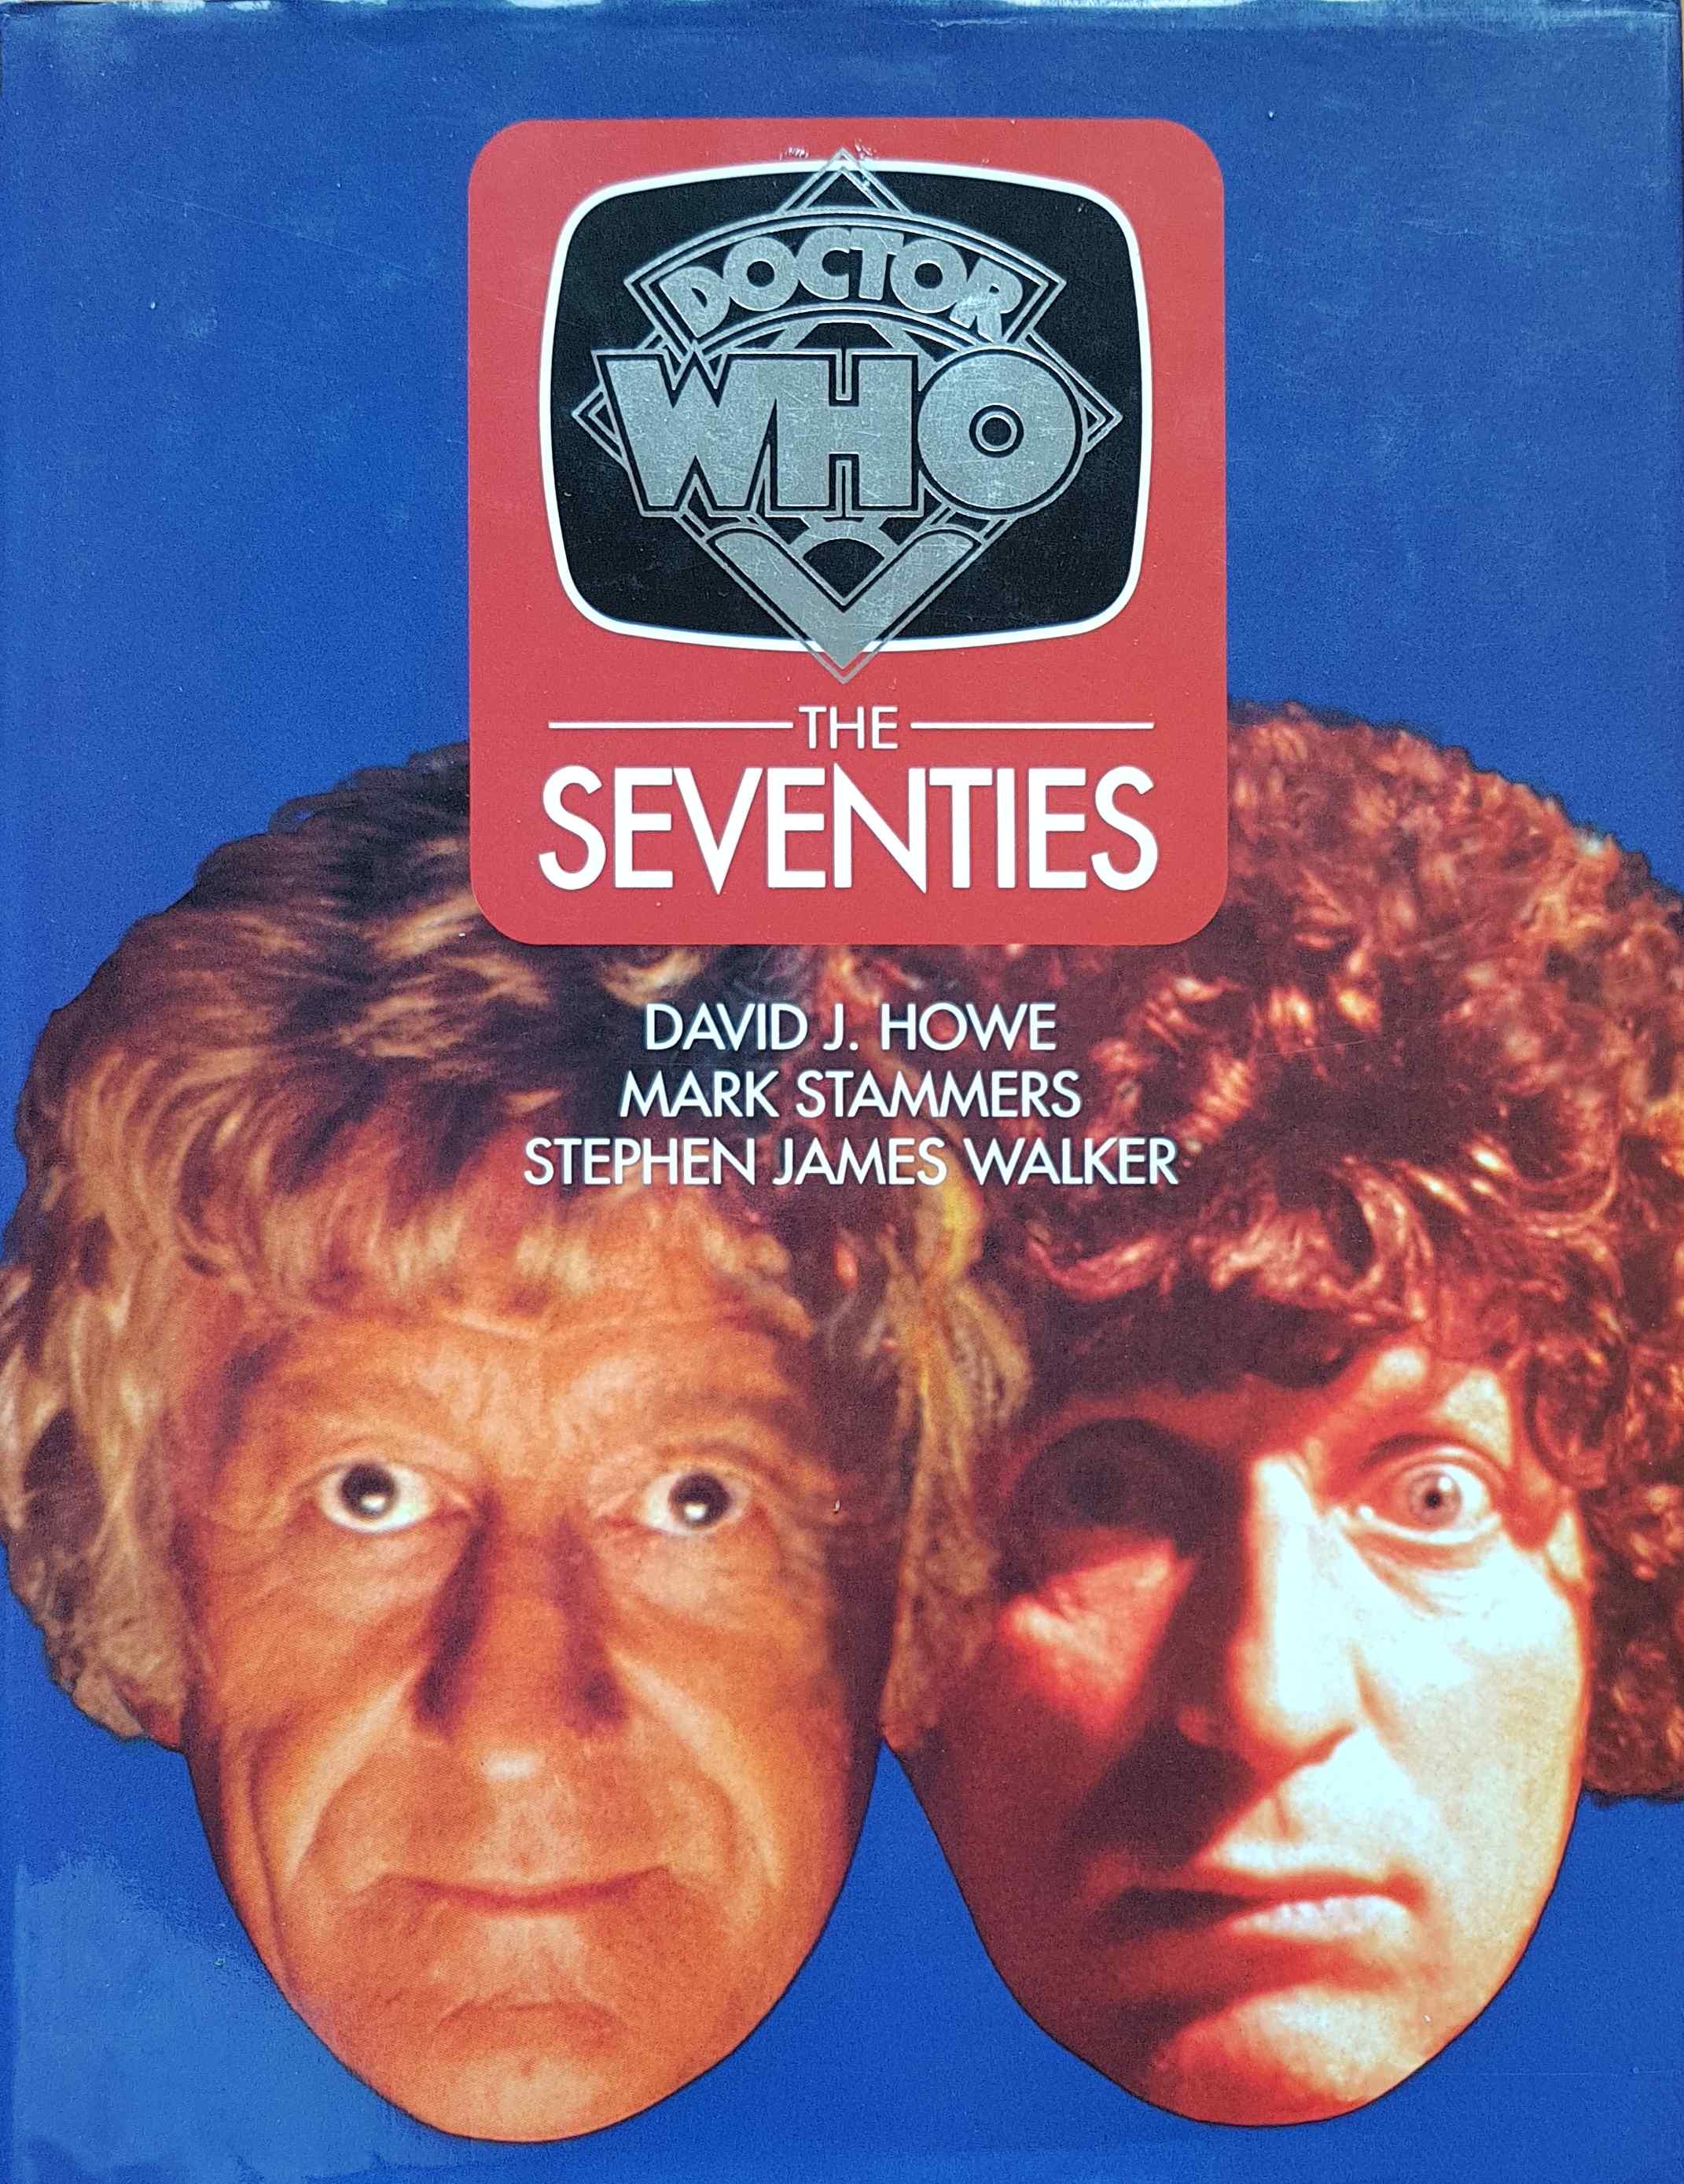 Picture of 1-85227-444-1 Doctor Who - The seventies by artist David J. Howe / Mark Stammers / Stephen James Walker from the BBC records and Tapes library